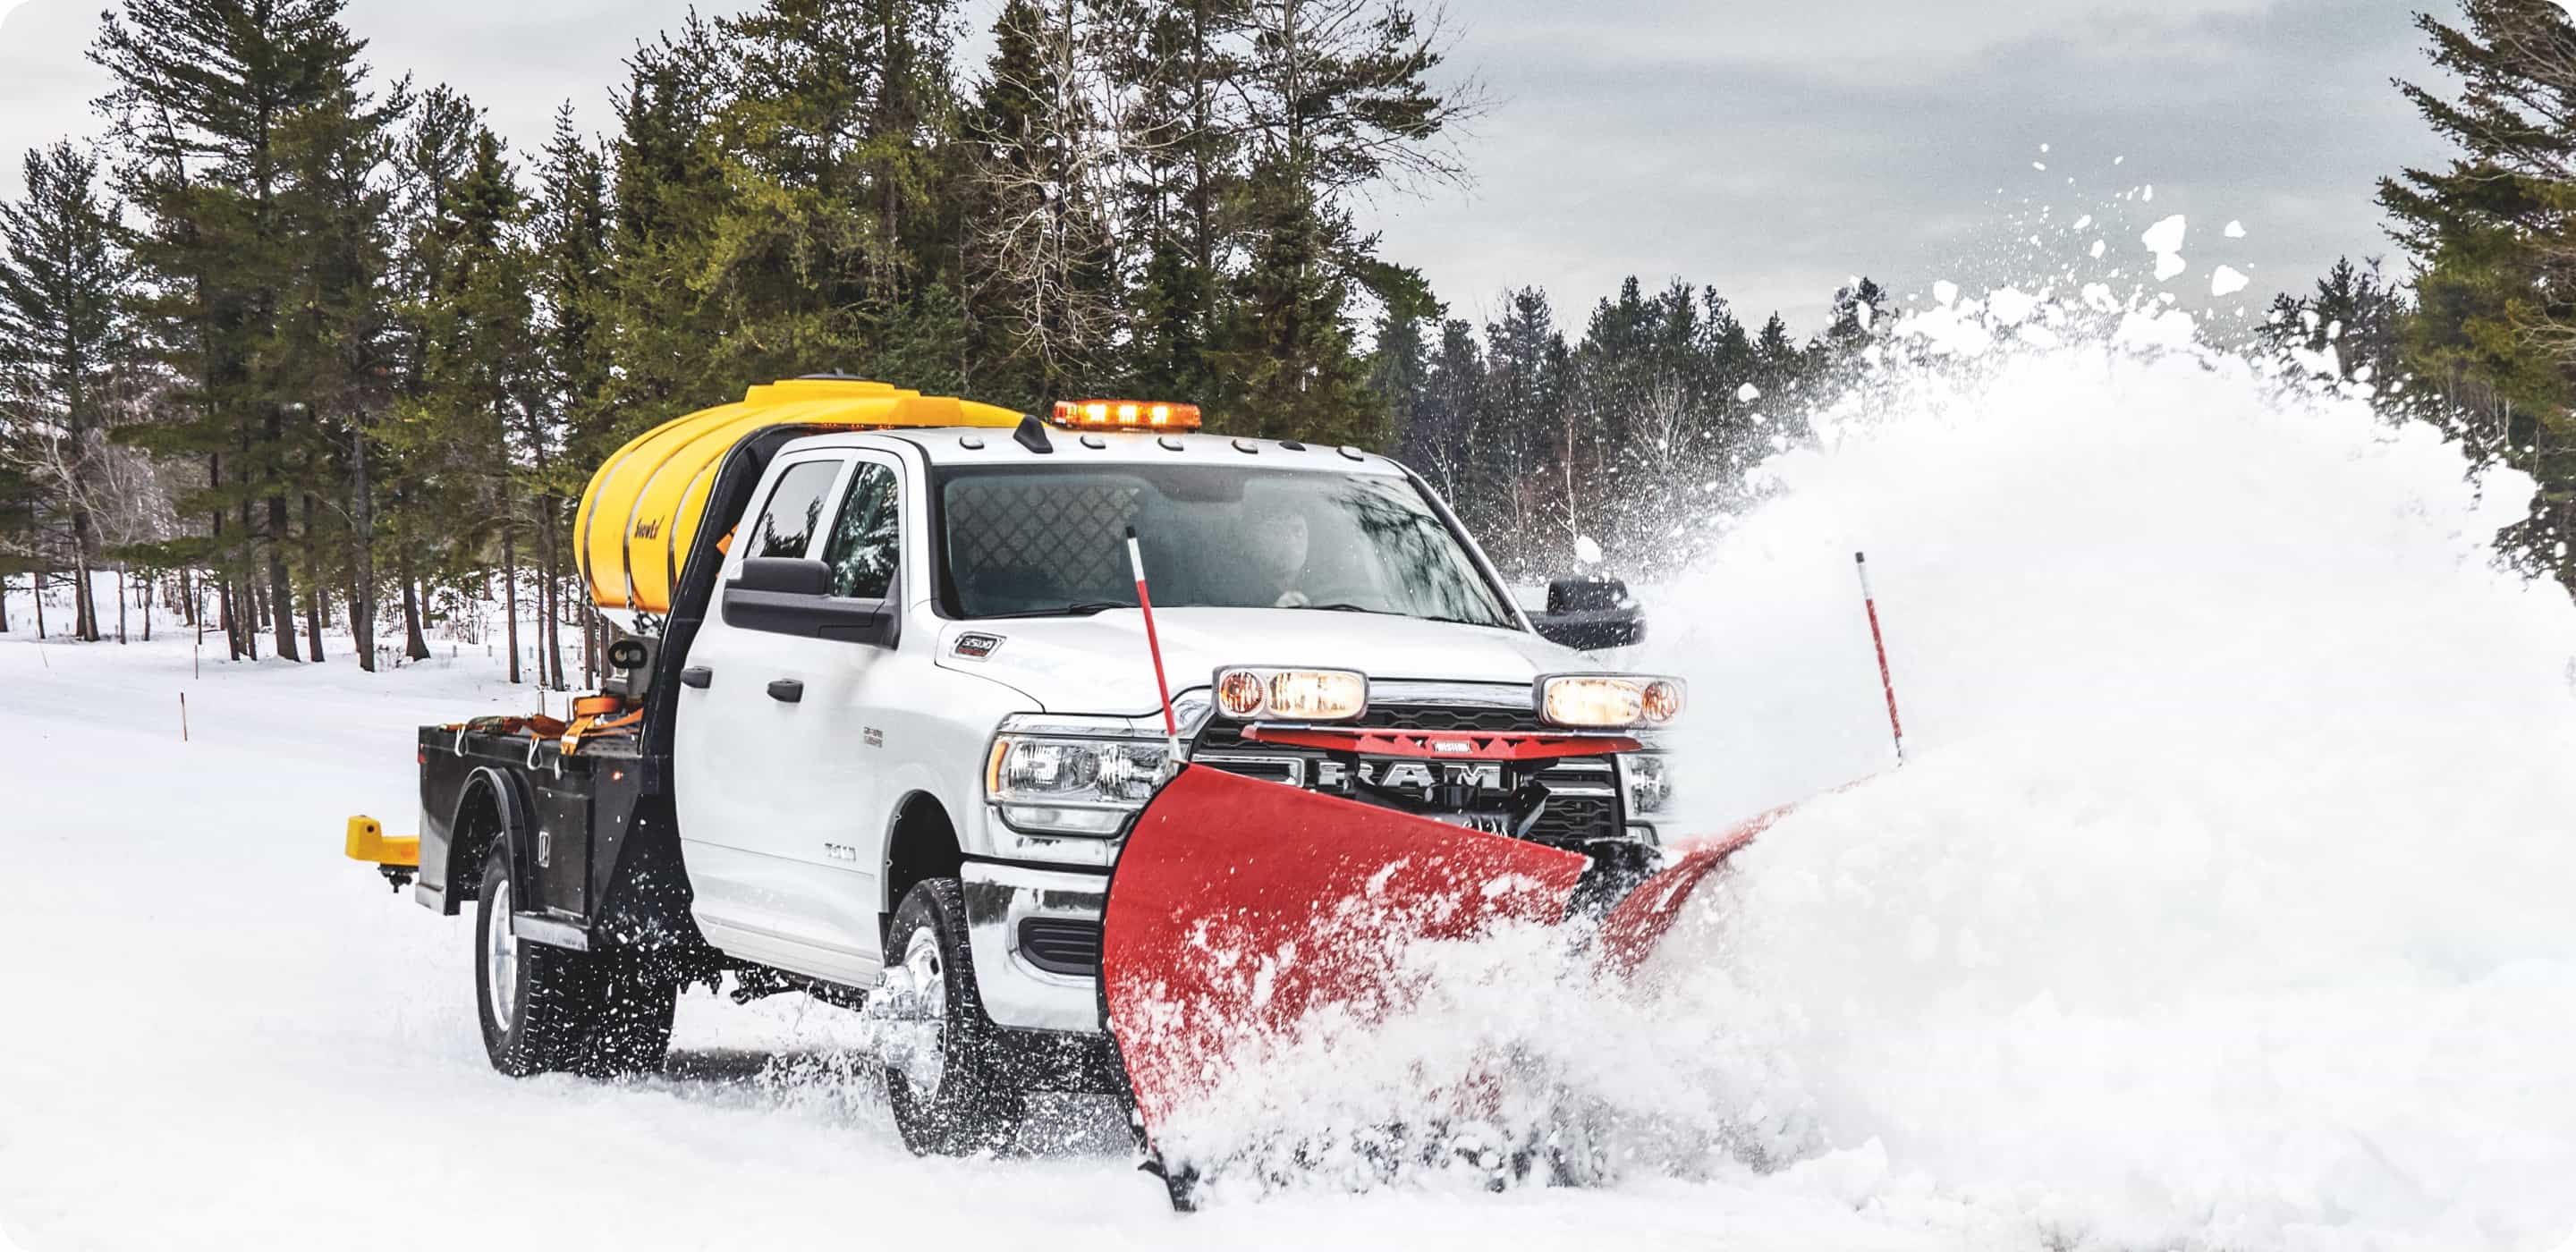 Display A 2021 Ram Chassis Cab with a snowplow upfit being driven through fresh snow.